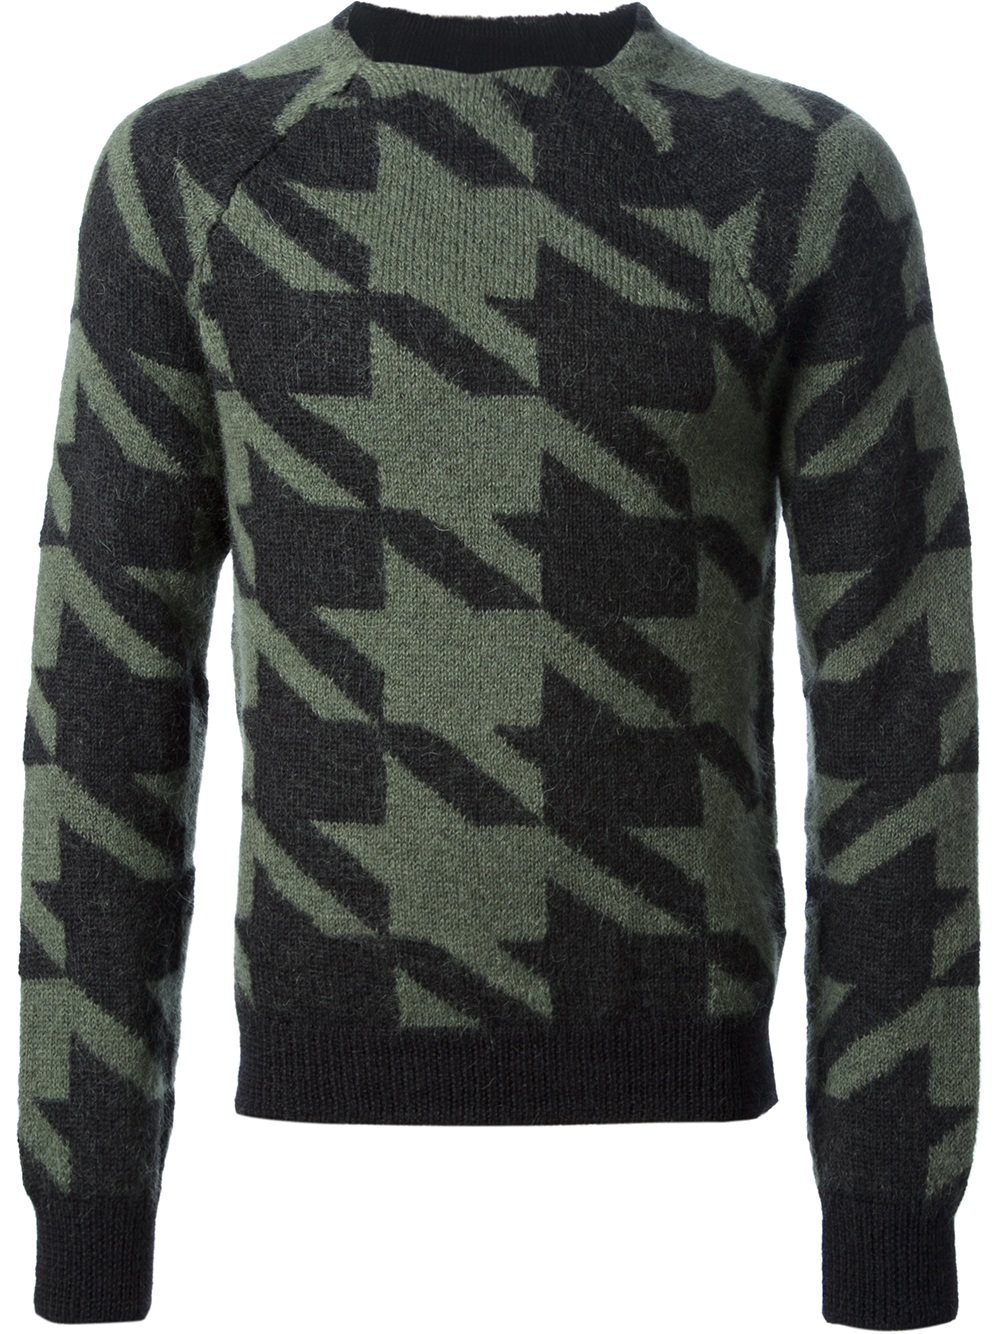 Lyst - Paul Smith Houndstooth Sweater in Black for Men